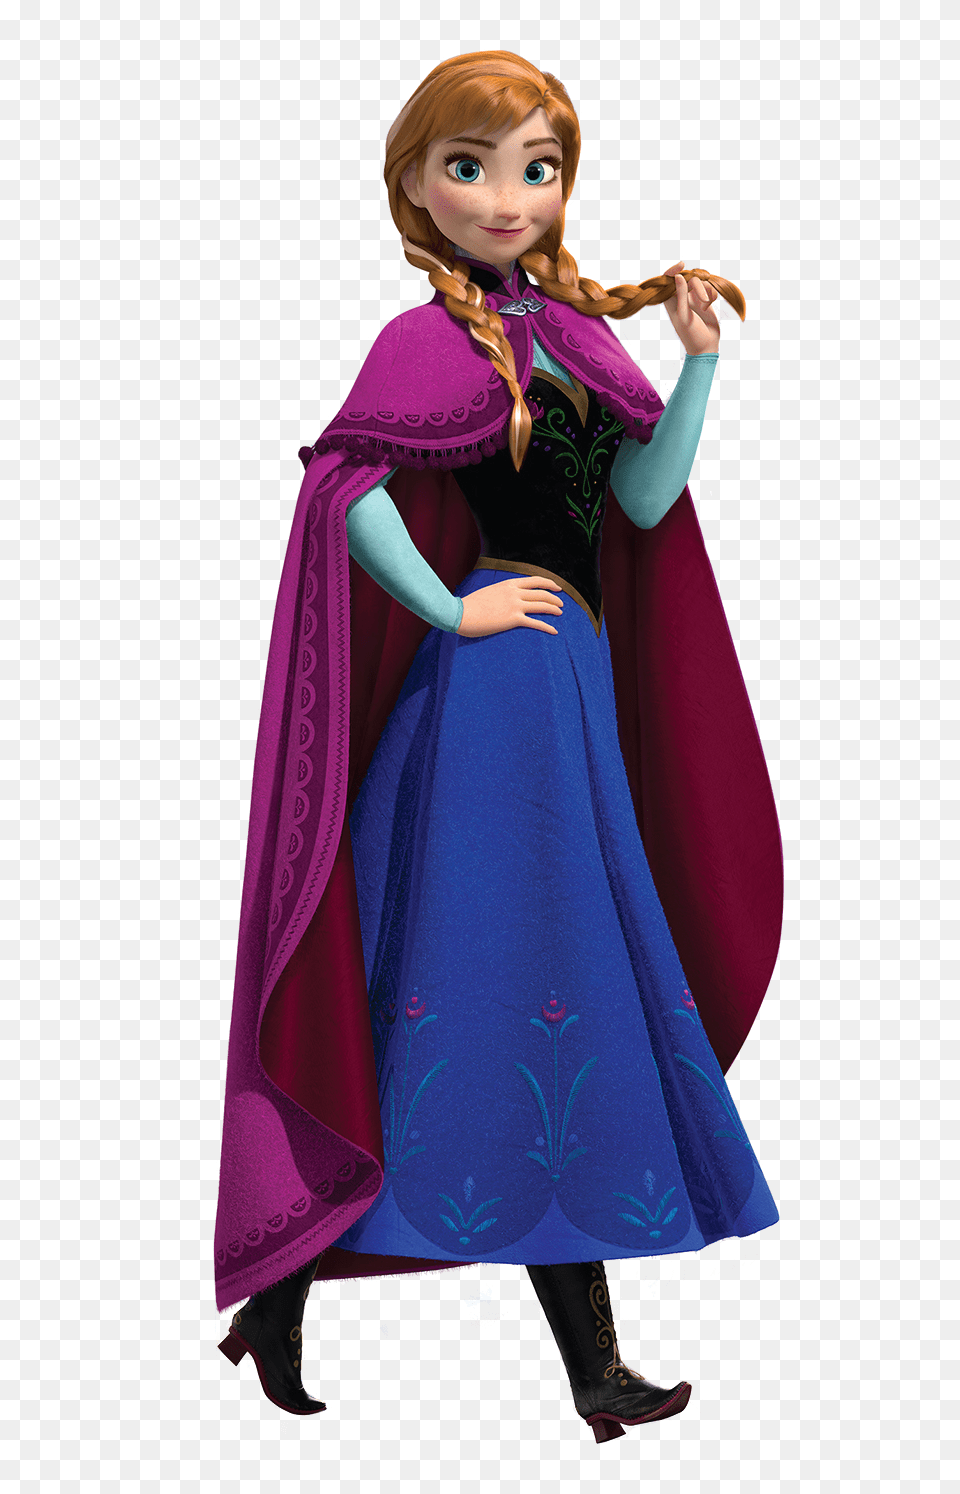 Anna Anna Anna Frozen Disney Frozen And Frozen, Fashion, Cape, Clothing, Person Png Image